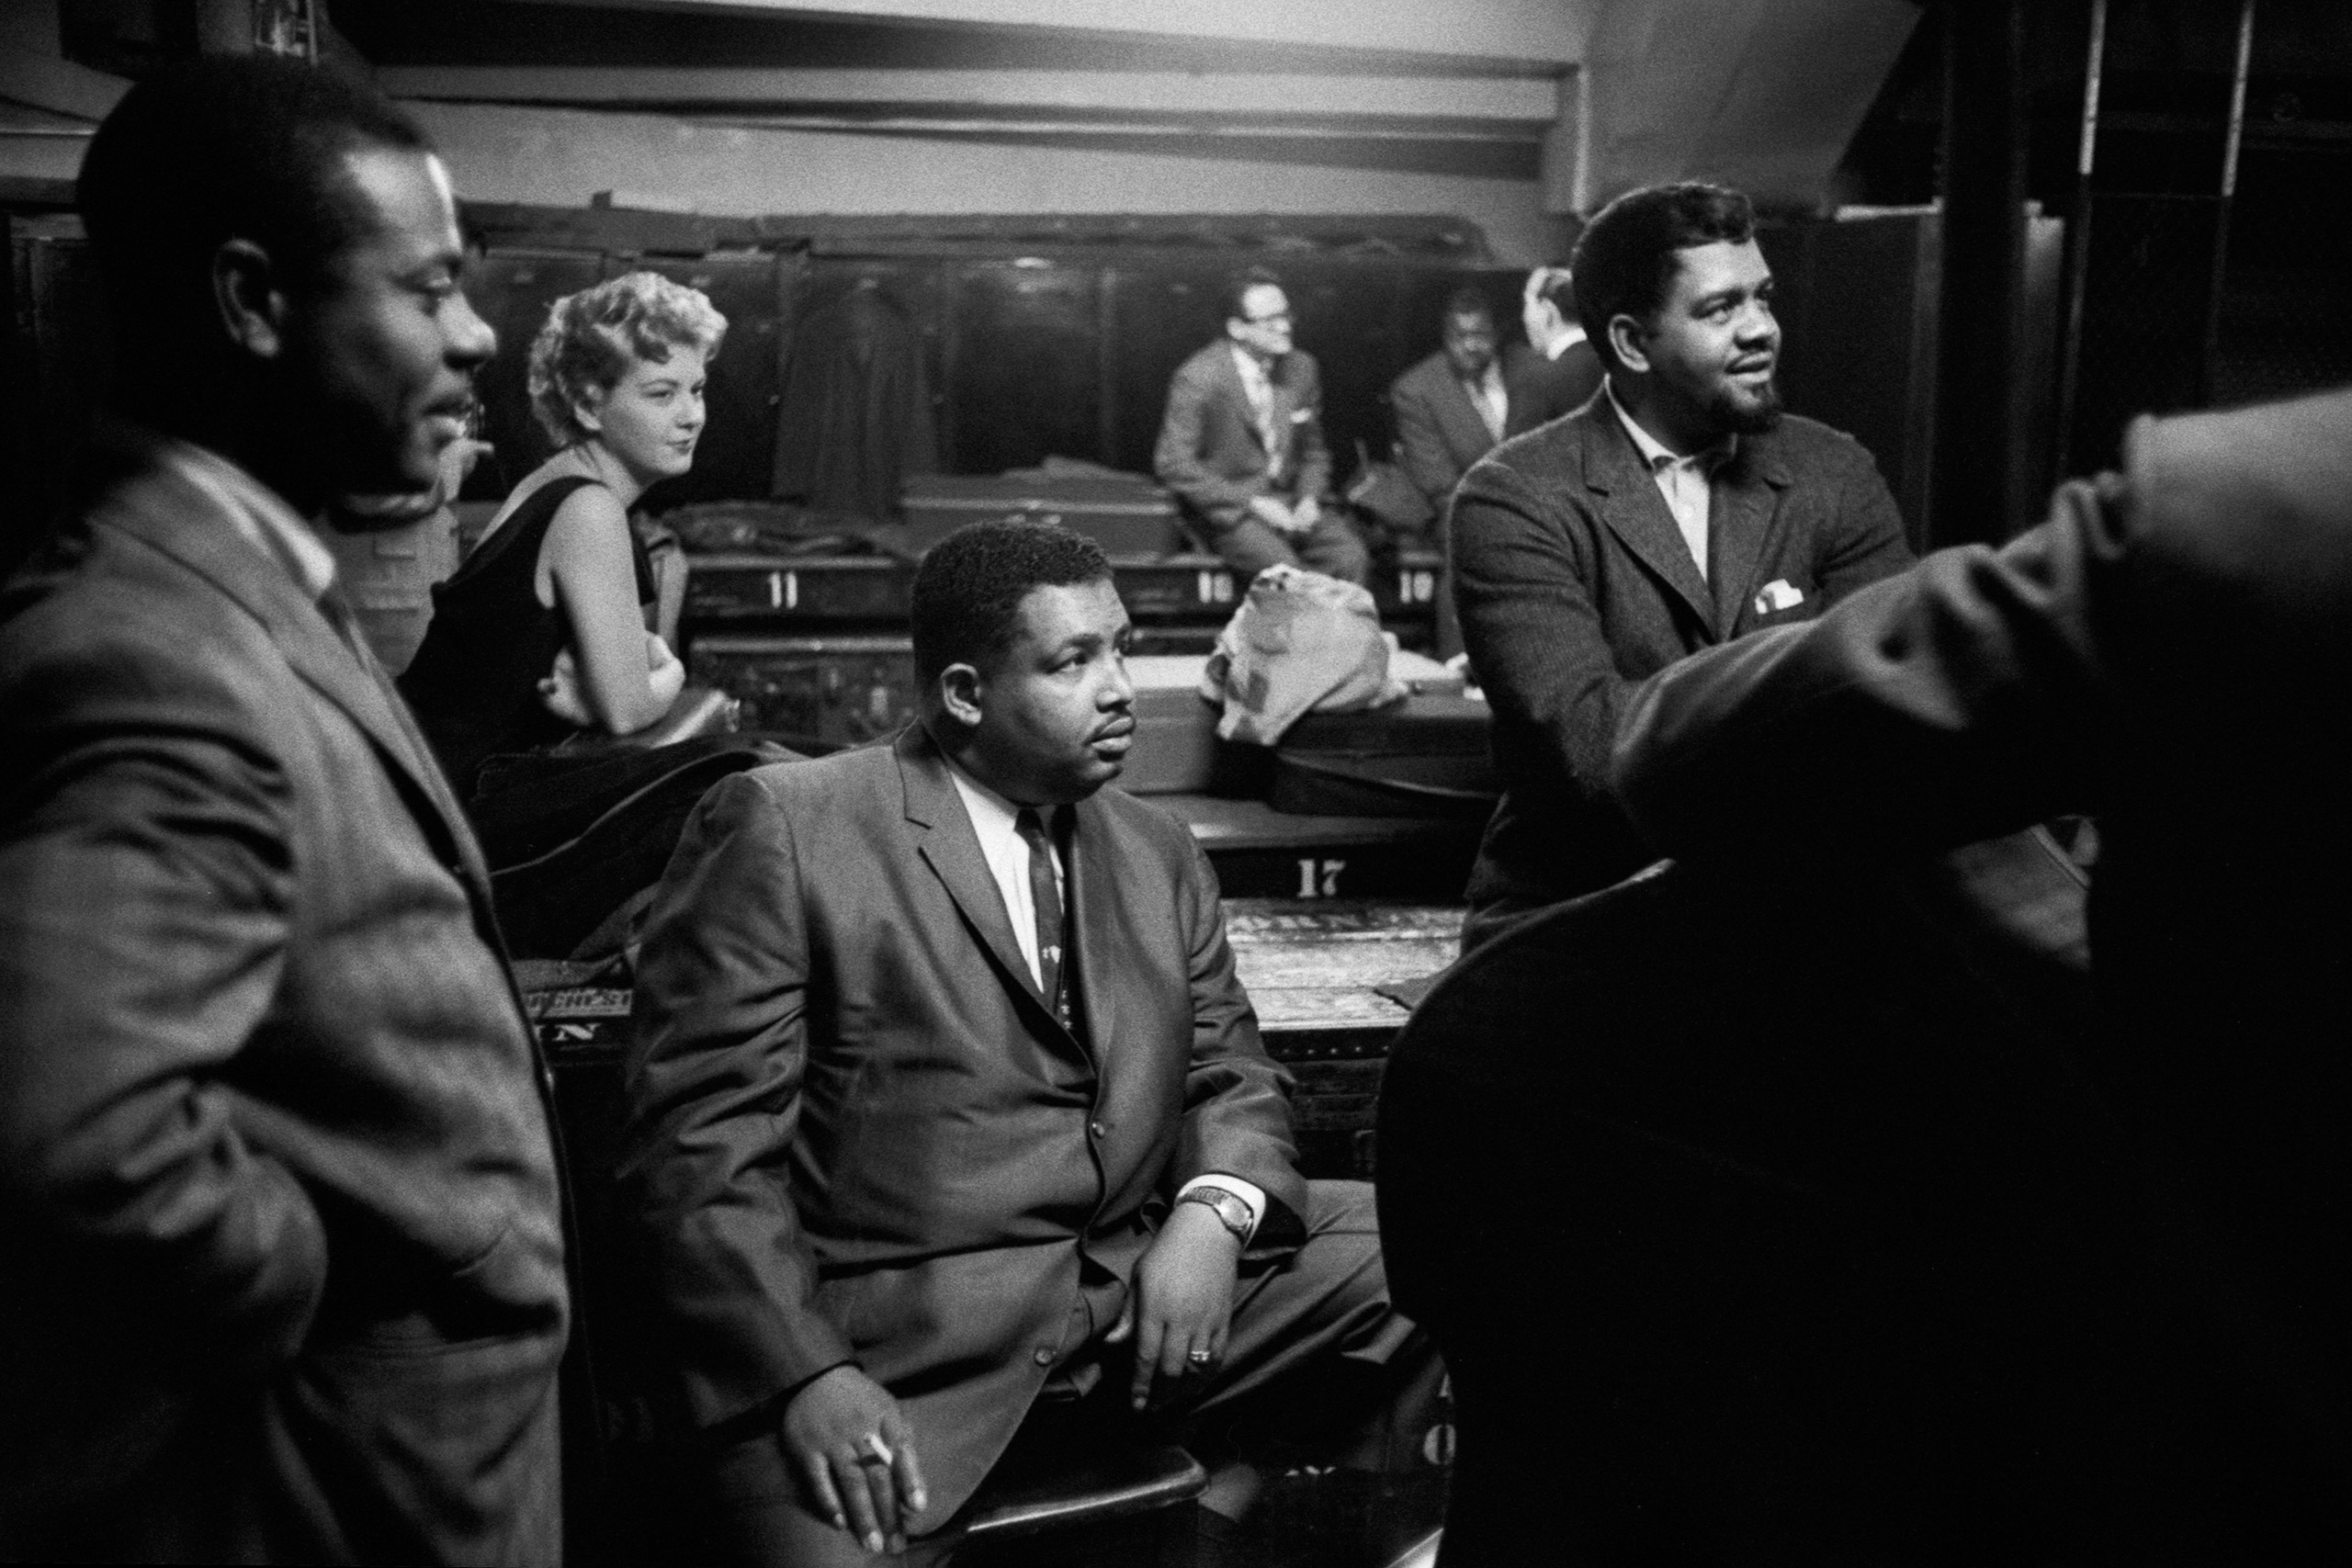 Armando Peraza, Helen Merrill,  Cannonball  Adderley, Al McKibbon, with Toots Thielmans and Oscar Peterson reflected in the mirror, backstage at Orchestra Hall, Chicago, 1957.